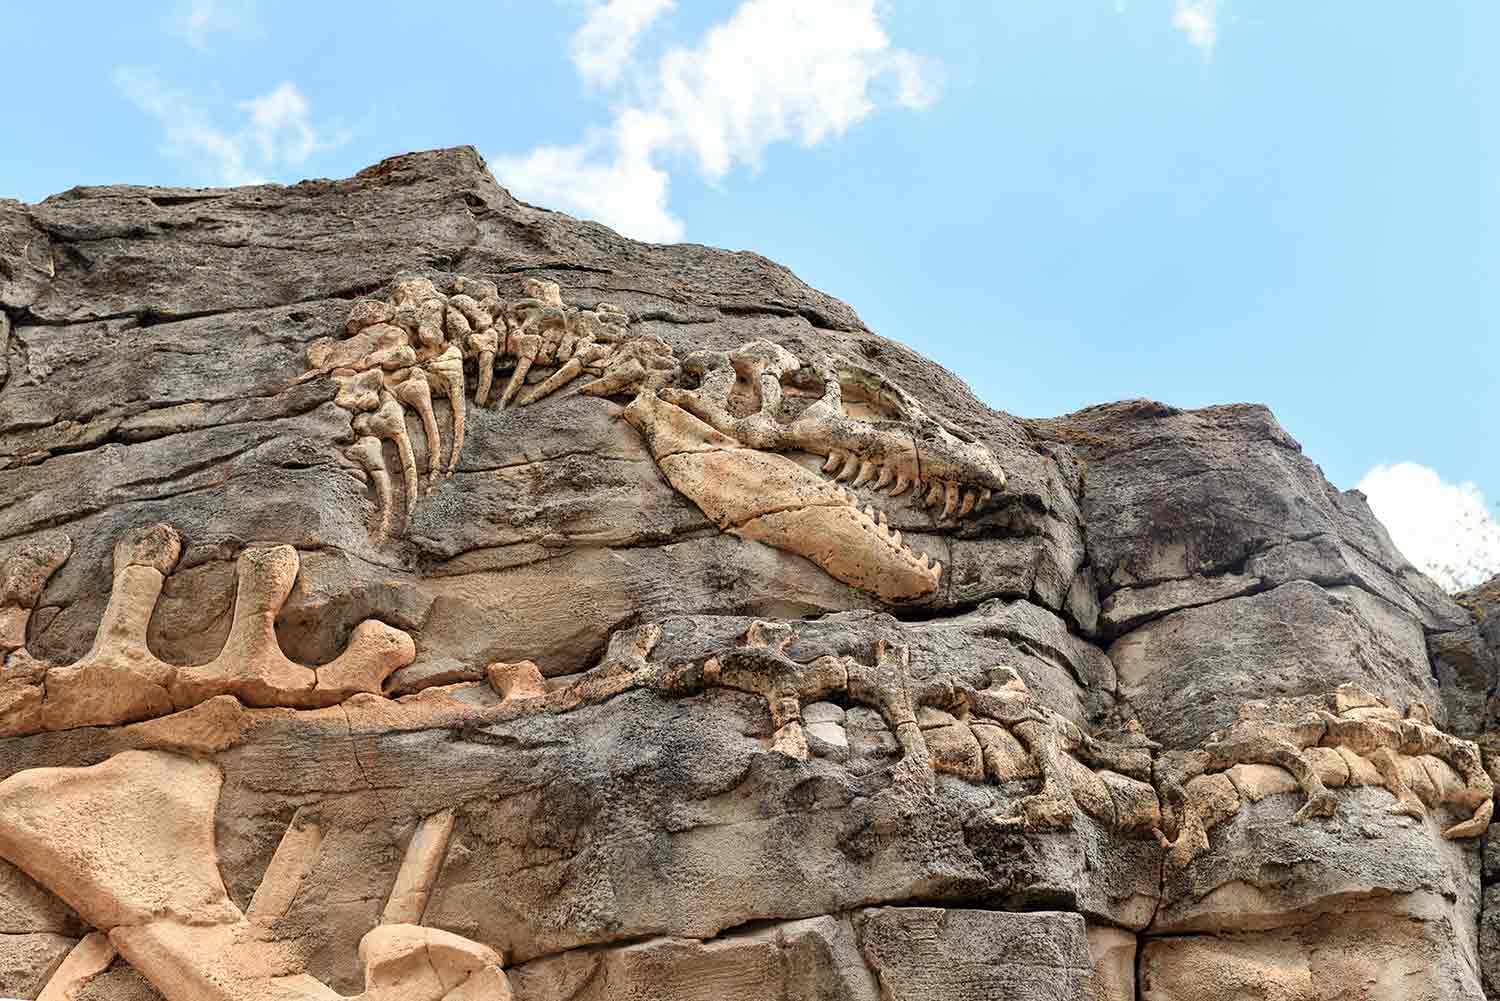 A large part of a dinosaur skeleton embedded in the side of rock.